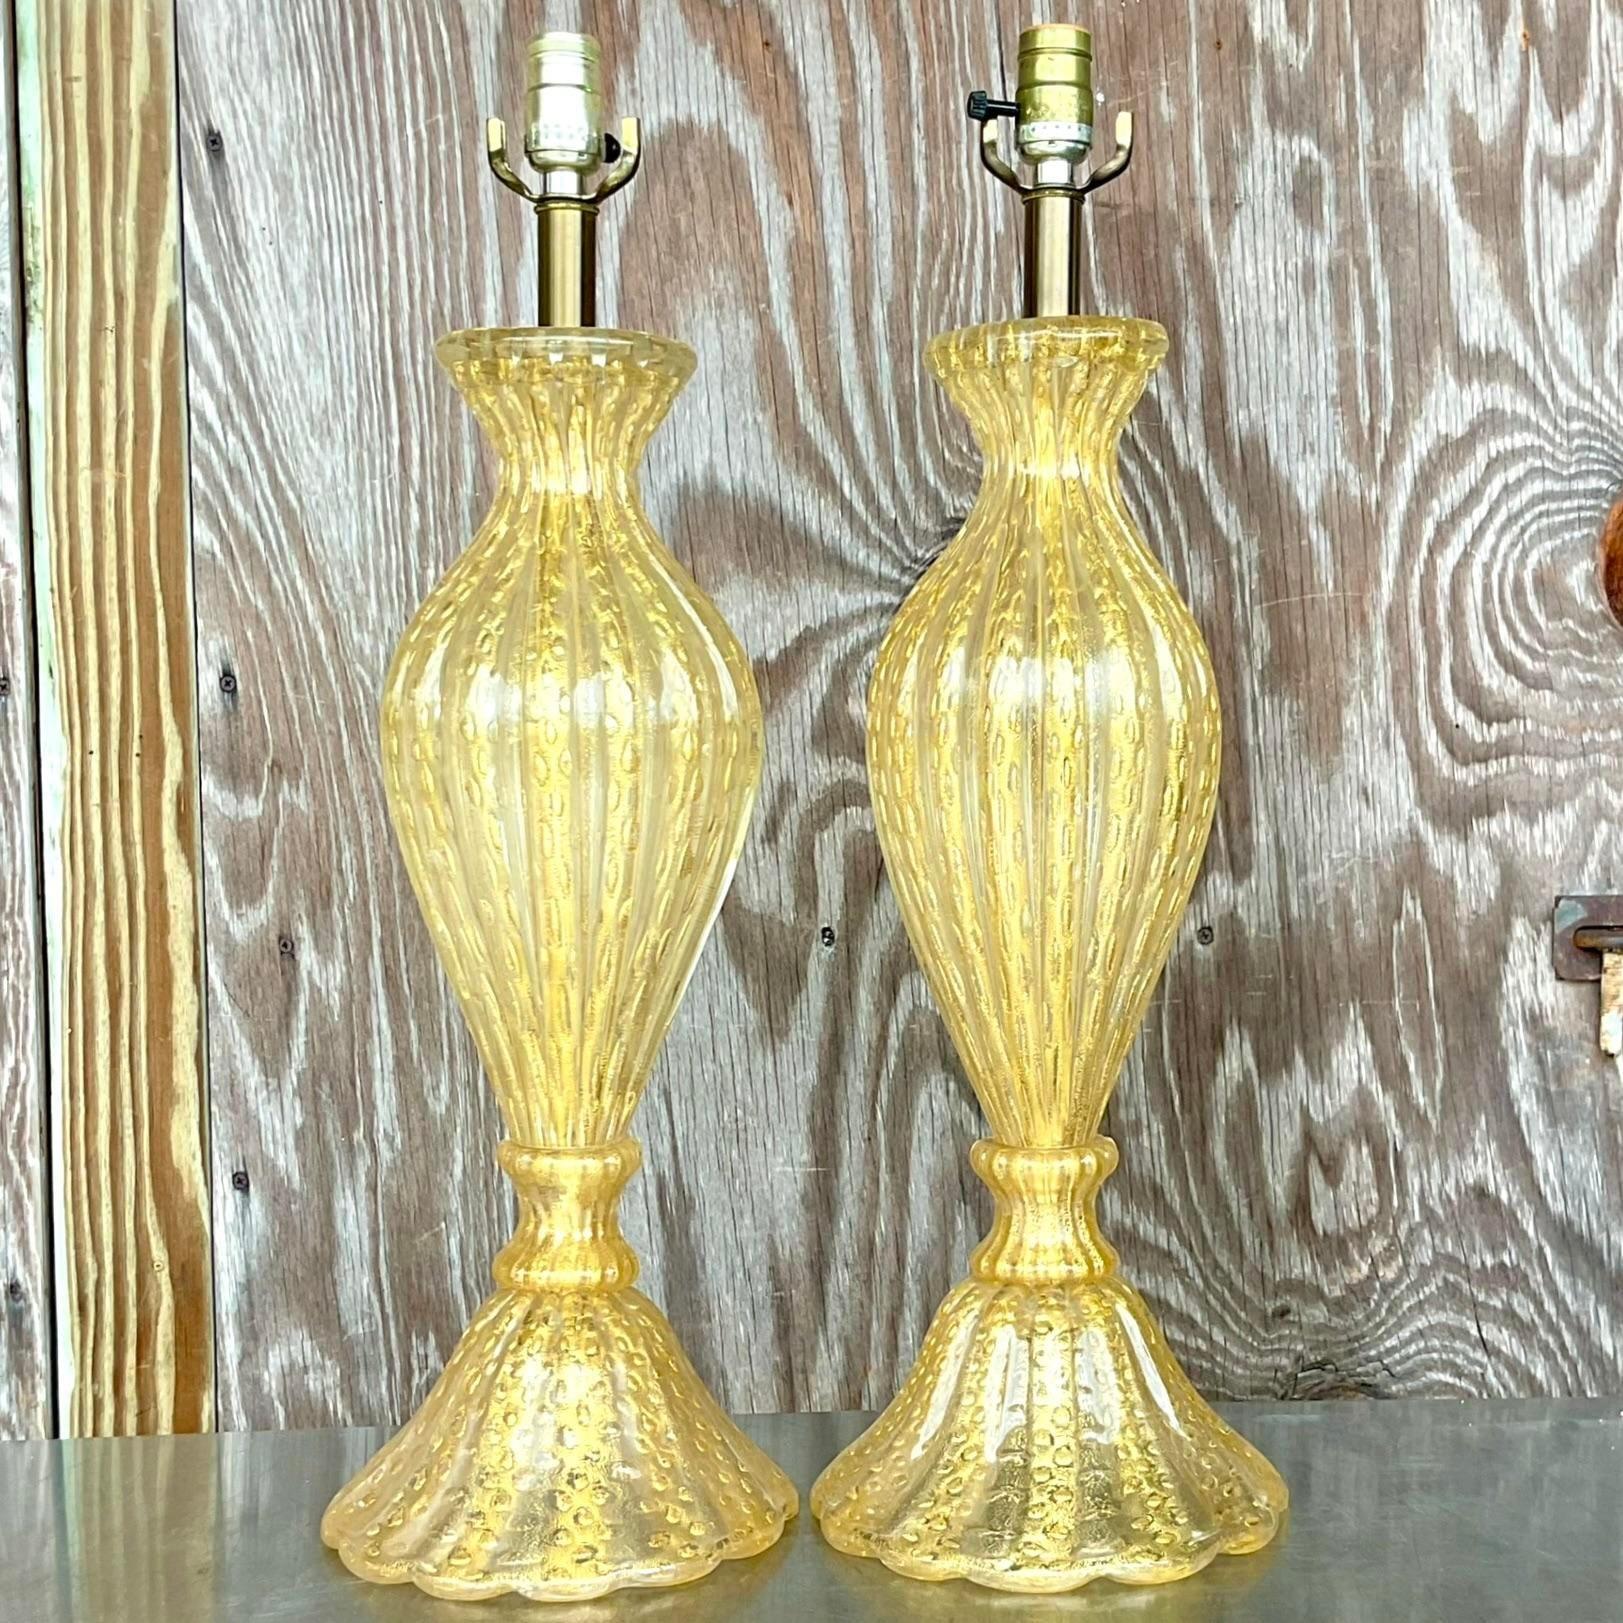 Vintage Regency Restored Murano Glass Table Lamps - a Pair For Sale 1